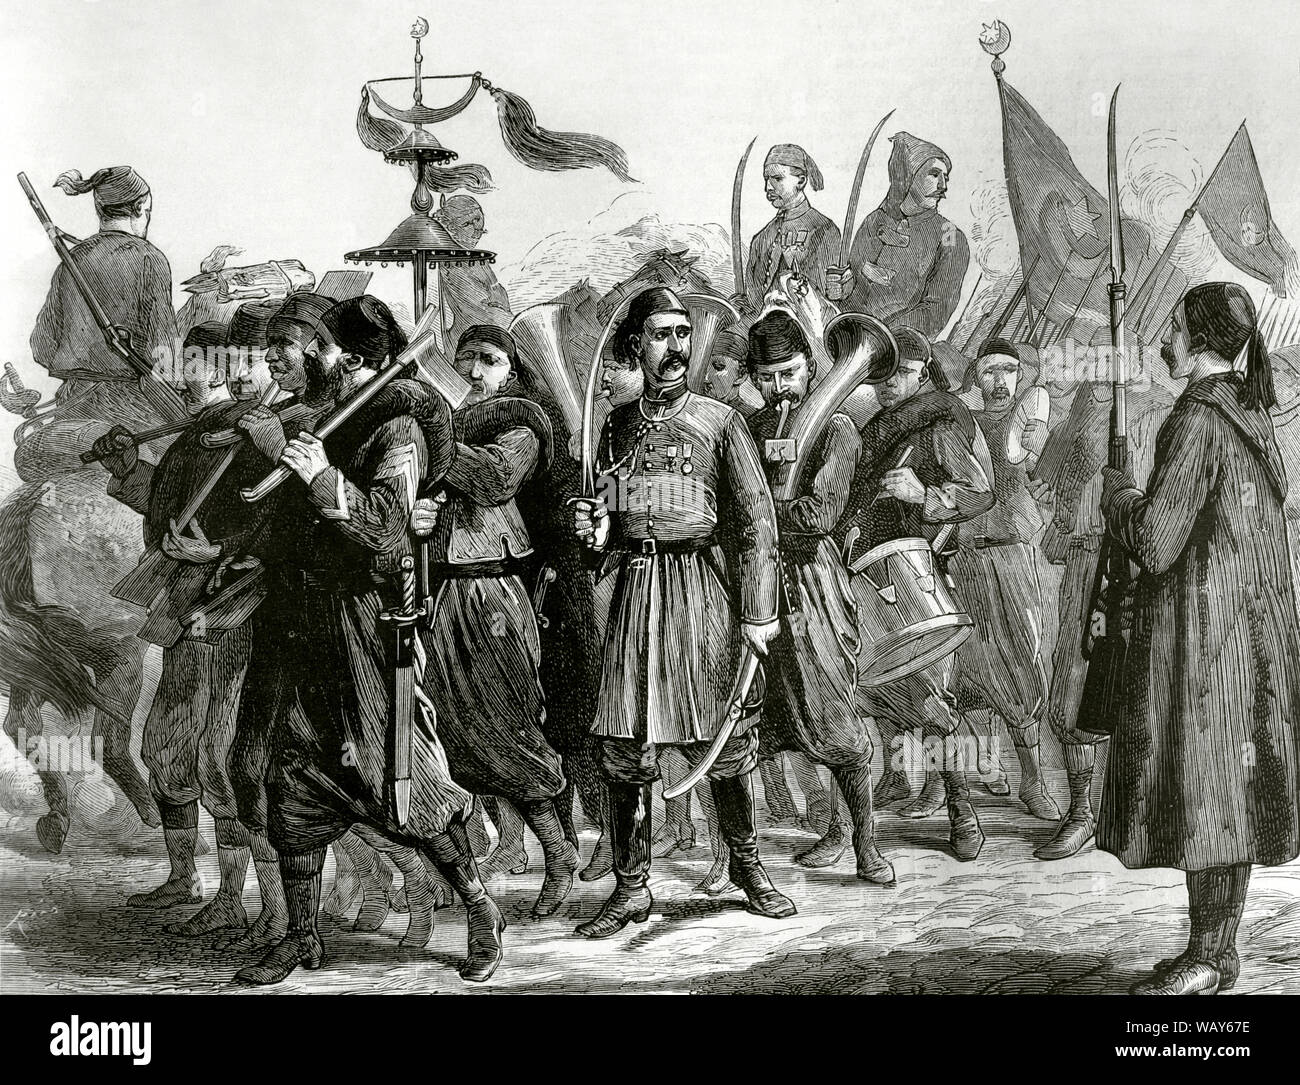 The Eastern Question. Serbian-Turkish Wars (1876-1878). Serbia declared war on the Ottoman Empire on June 30, 1876. Ottoman troops marching towards the border of Serbia. Engraving. La Ilustracion Española y Americana, July 8, 1876. Stock Photo